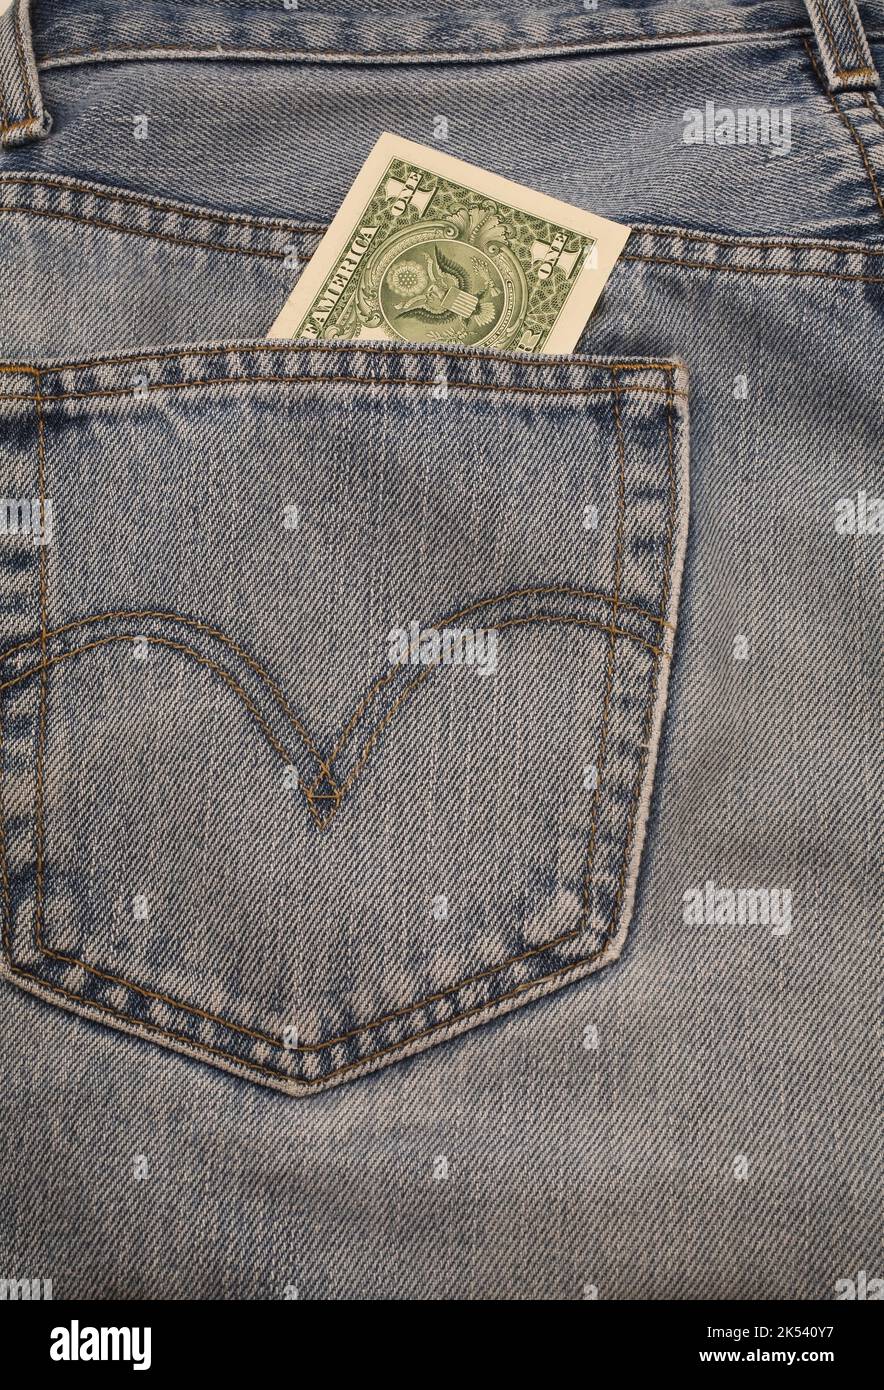 US dollar sticking out of back pocket on pair of blue jeans. Stock Photo